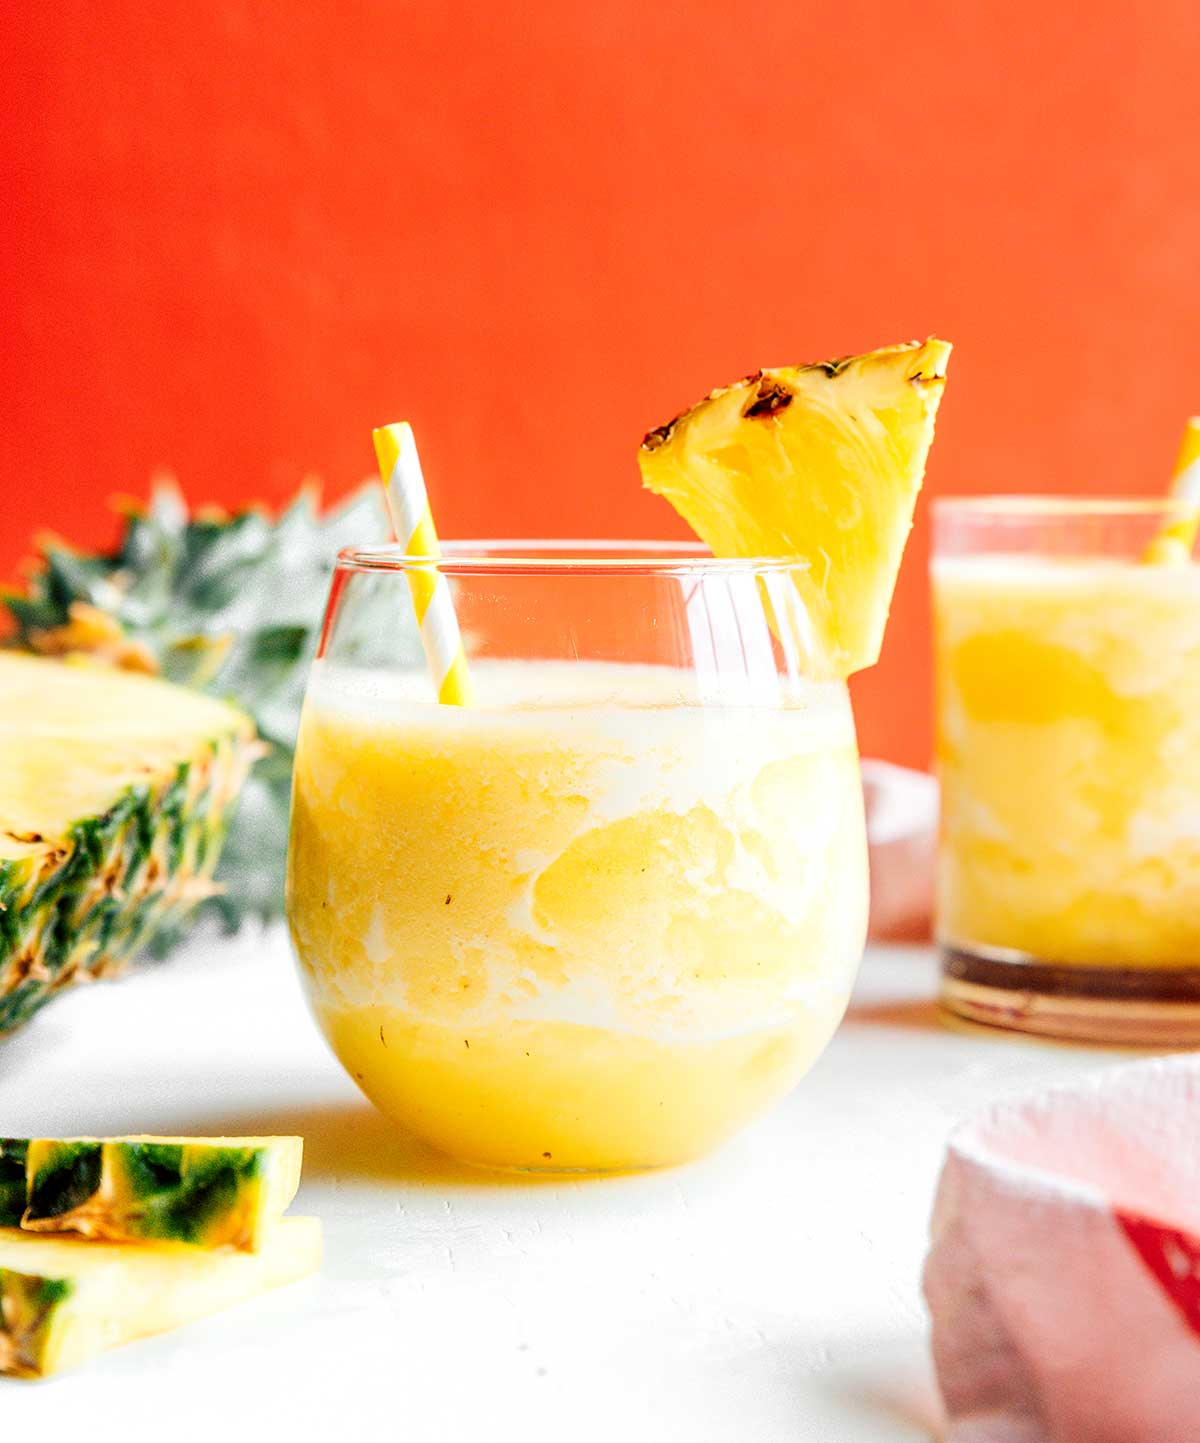 A glass filled with pineapple smoothie and decorated with a slice of pineapple